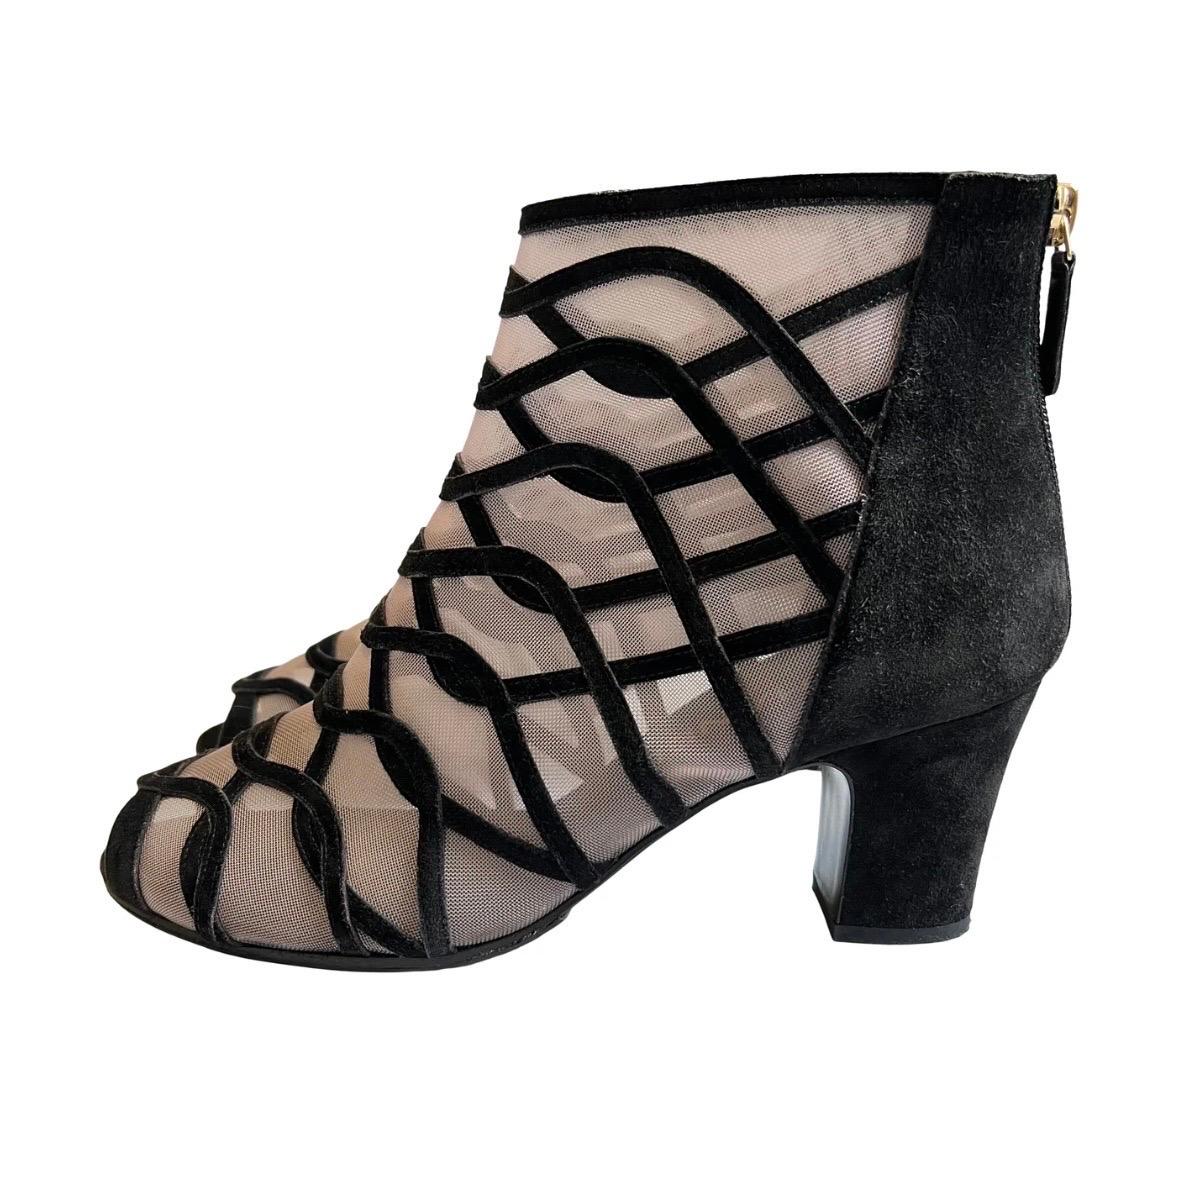 Chanel Mesh Cage Peep Toe Booties In Good Condition For Sale In Los Angeles, CA